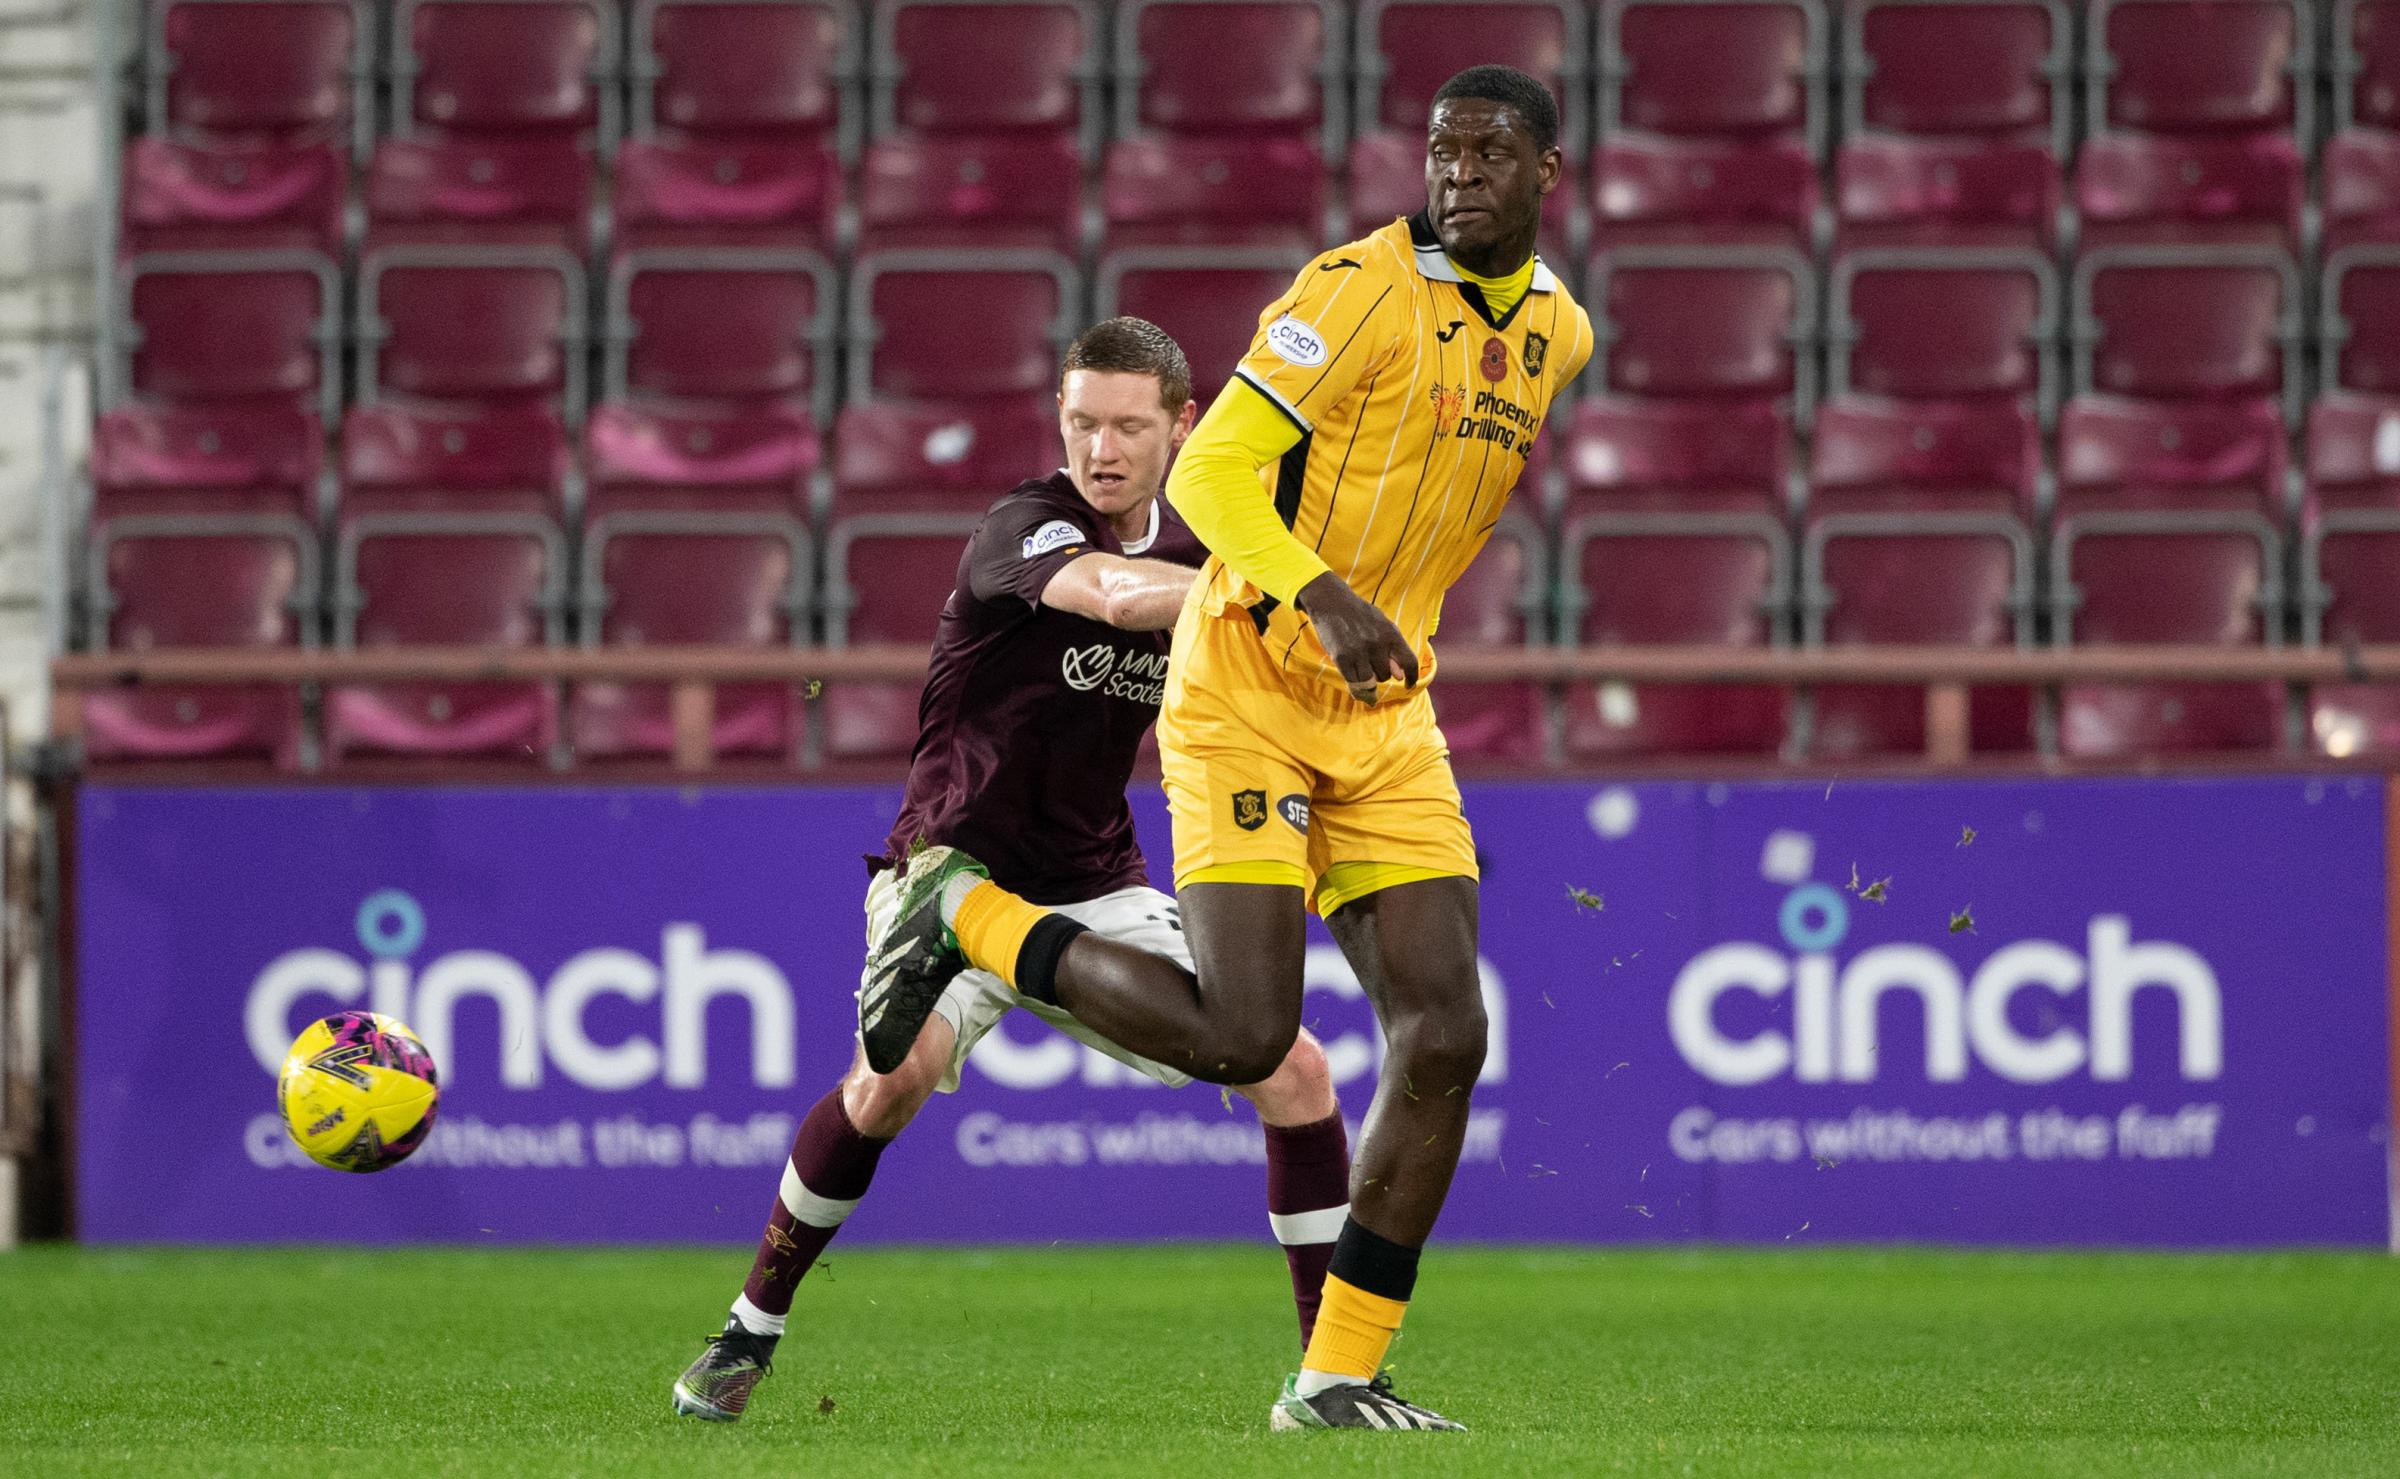 Nouble claims Hearts' Forrest admitted handball before late equaliser